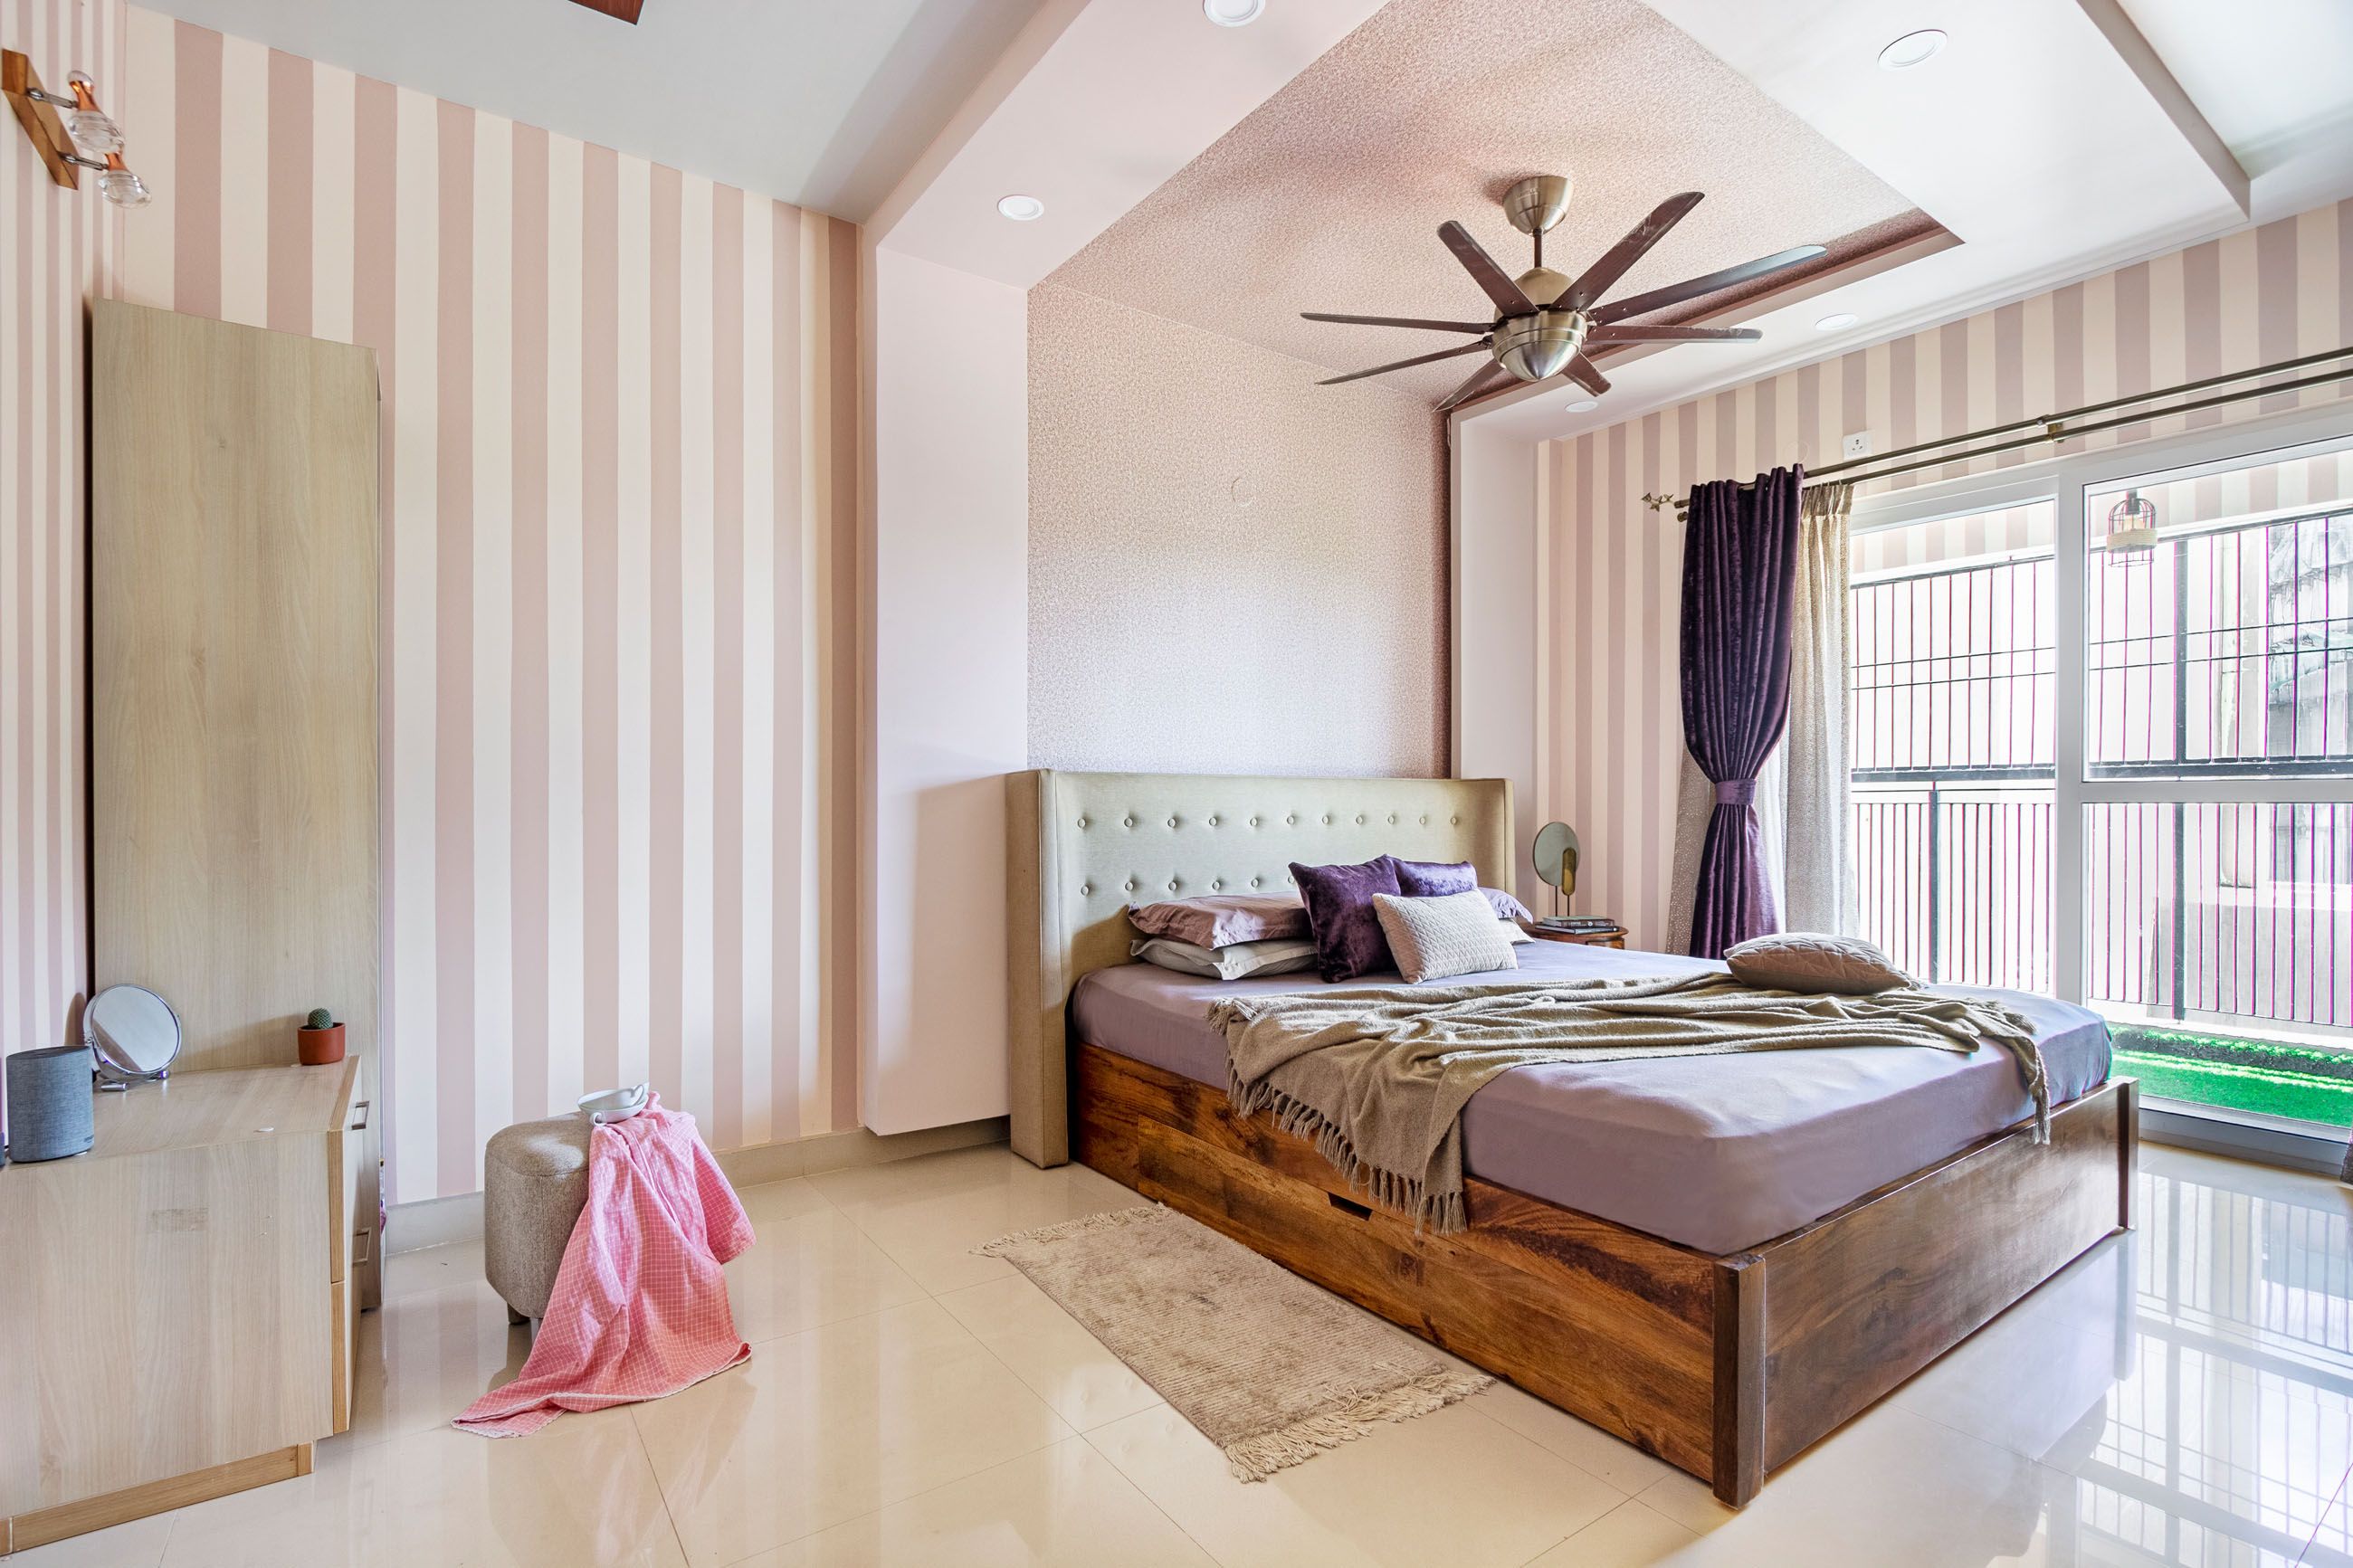 Contemporary Kids Room Design With Pink And White Striped Wallpaper